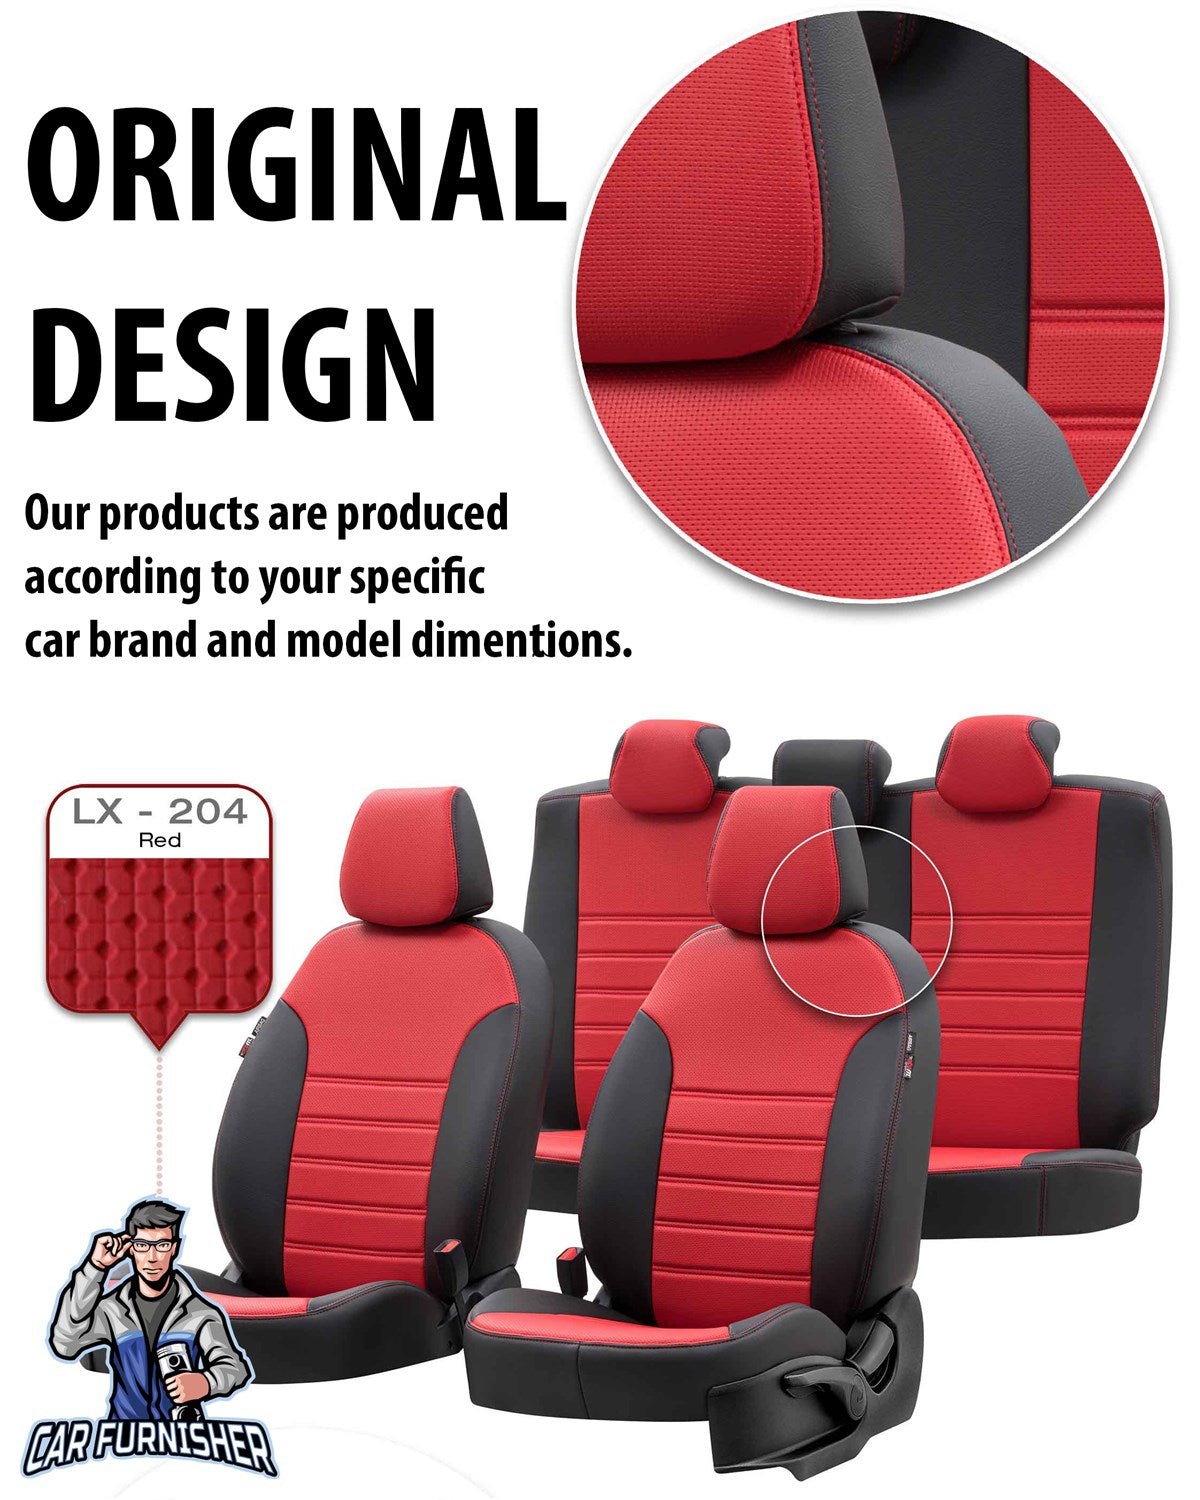 Renault Latitude Seat Covers New York Leather Design Smoked Leather